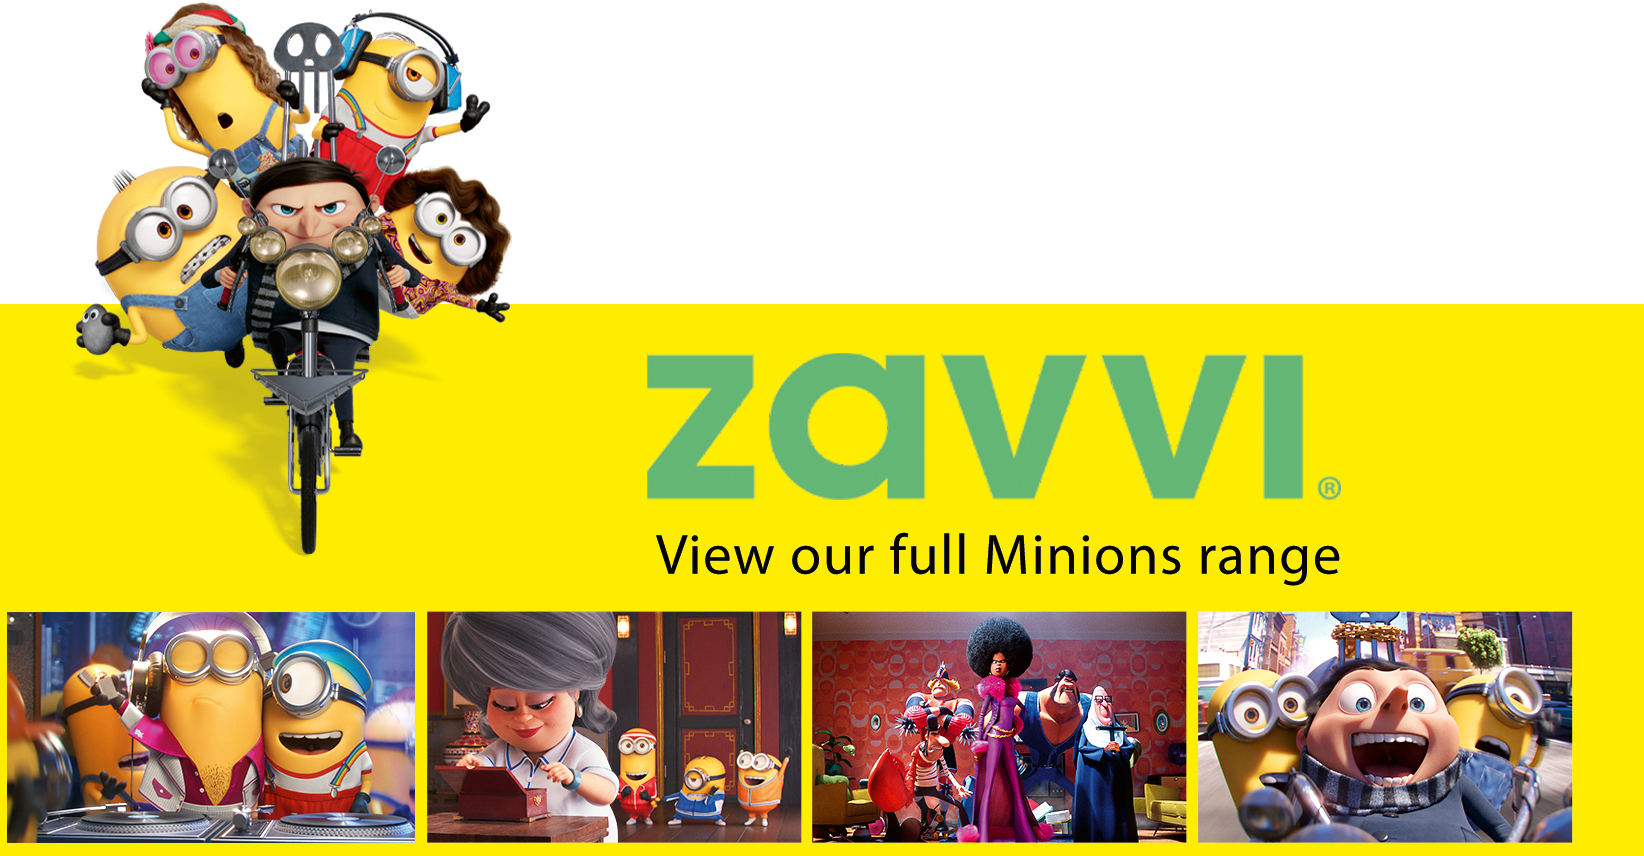 Discover our full Minions Range